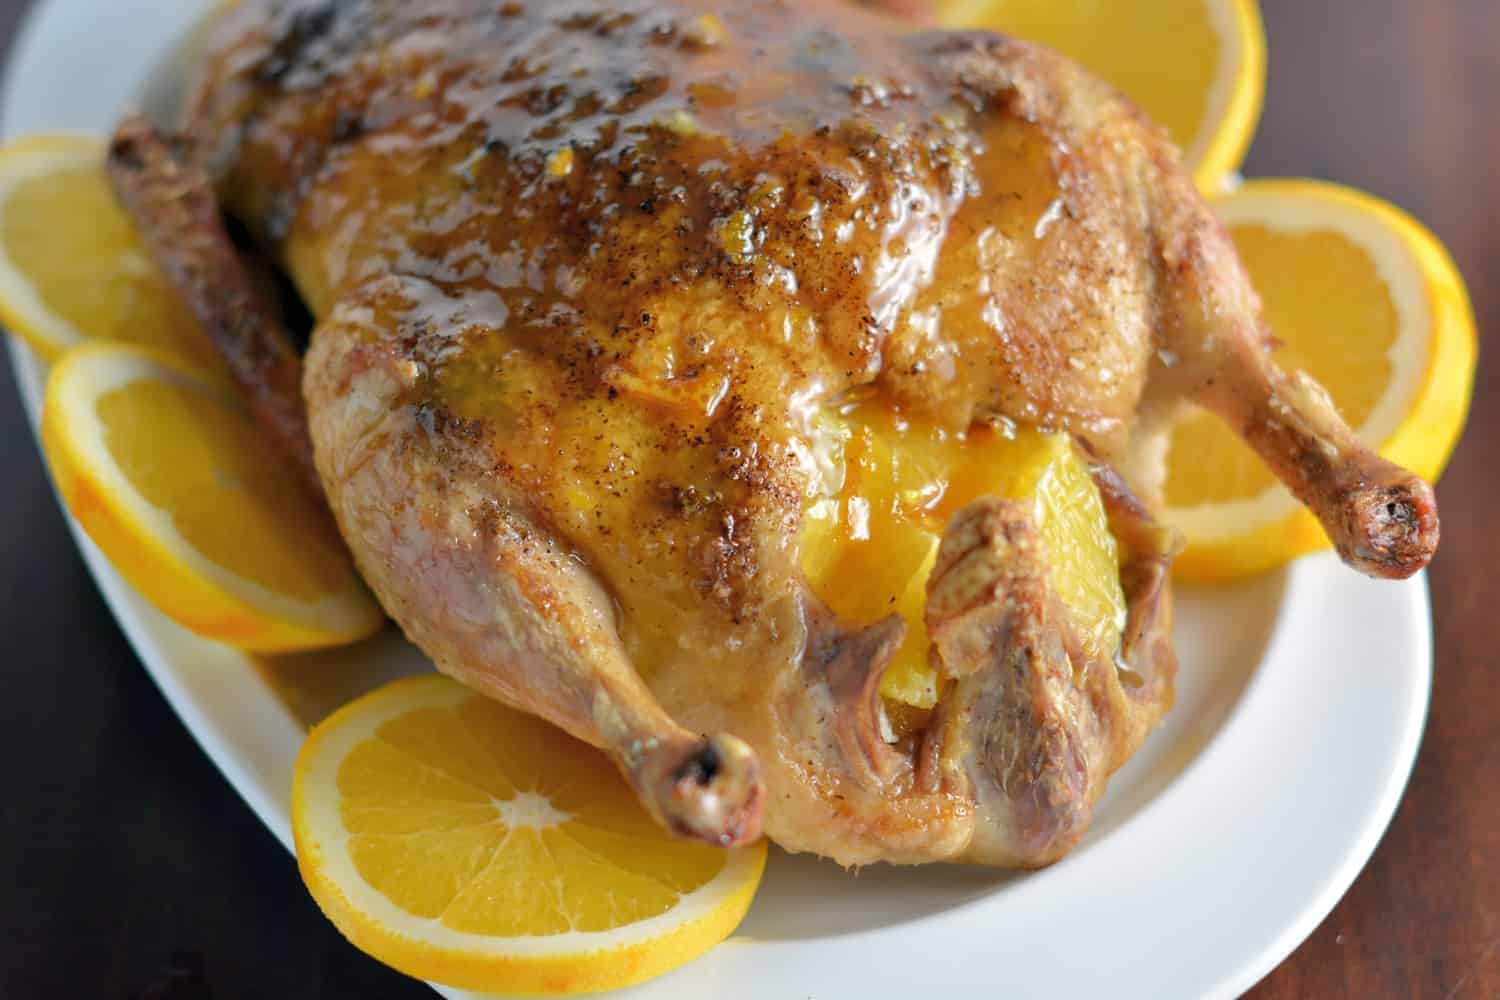 Crispy Duck A L’Orange Recipe- You won’t believe how easy this dish really is! Classic crispy duck a l'orange makes for a perfect holiday or special event dinner. Super juicy and flavorful meat with a crispy, seasoned skin.